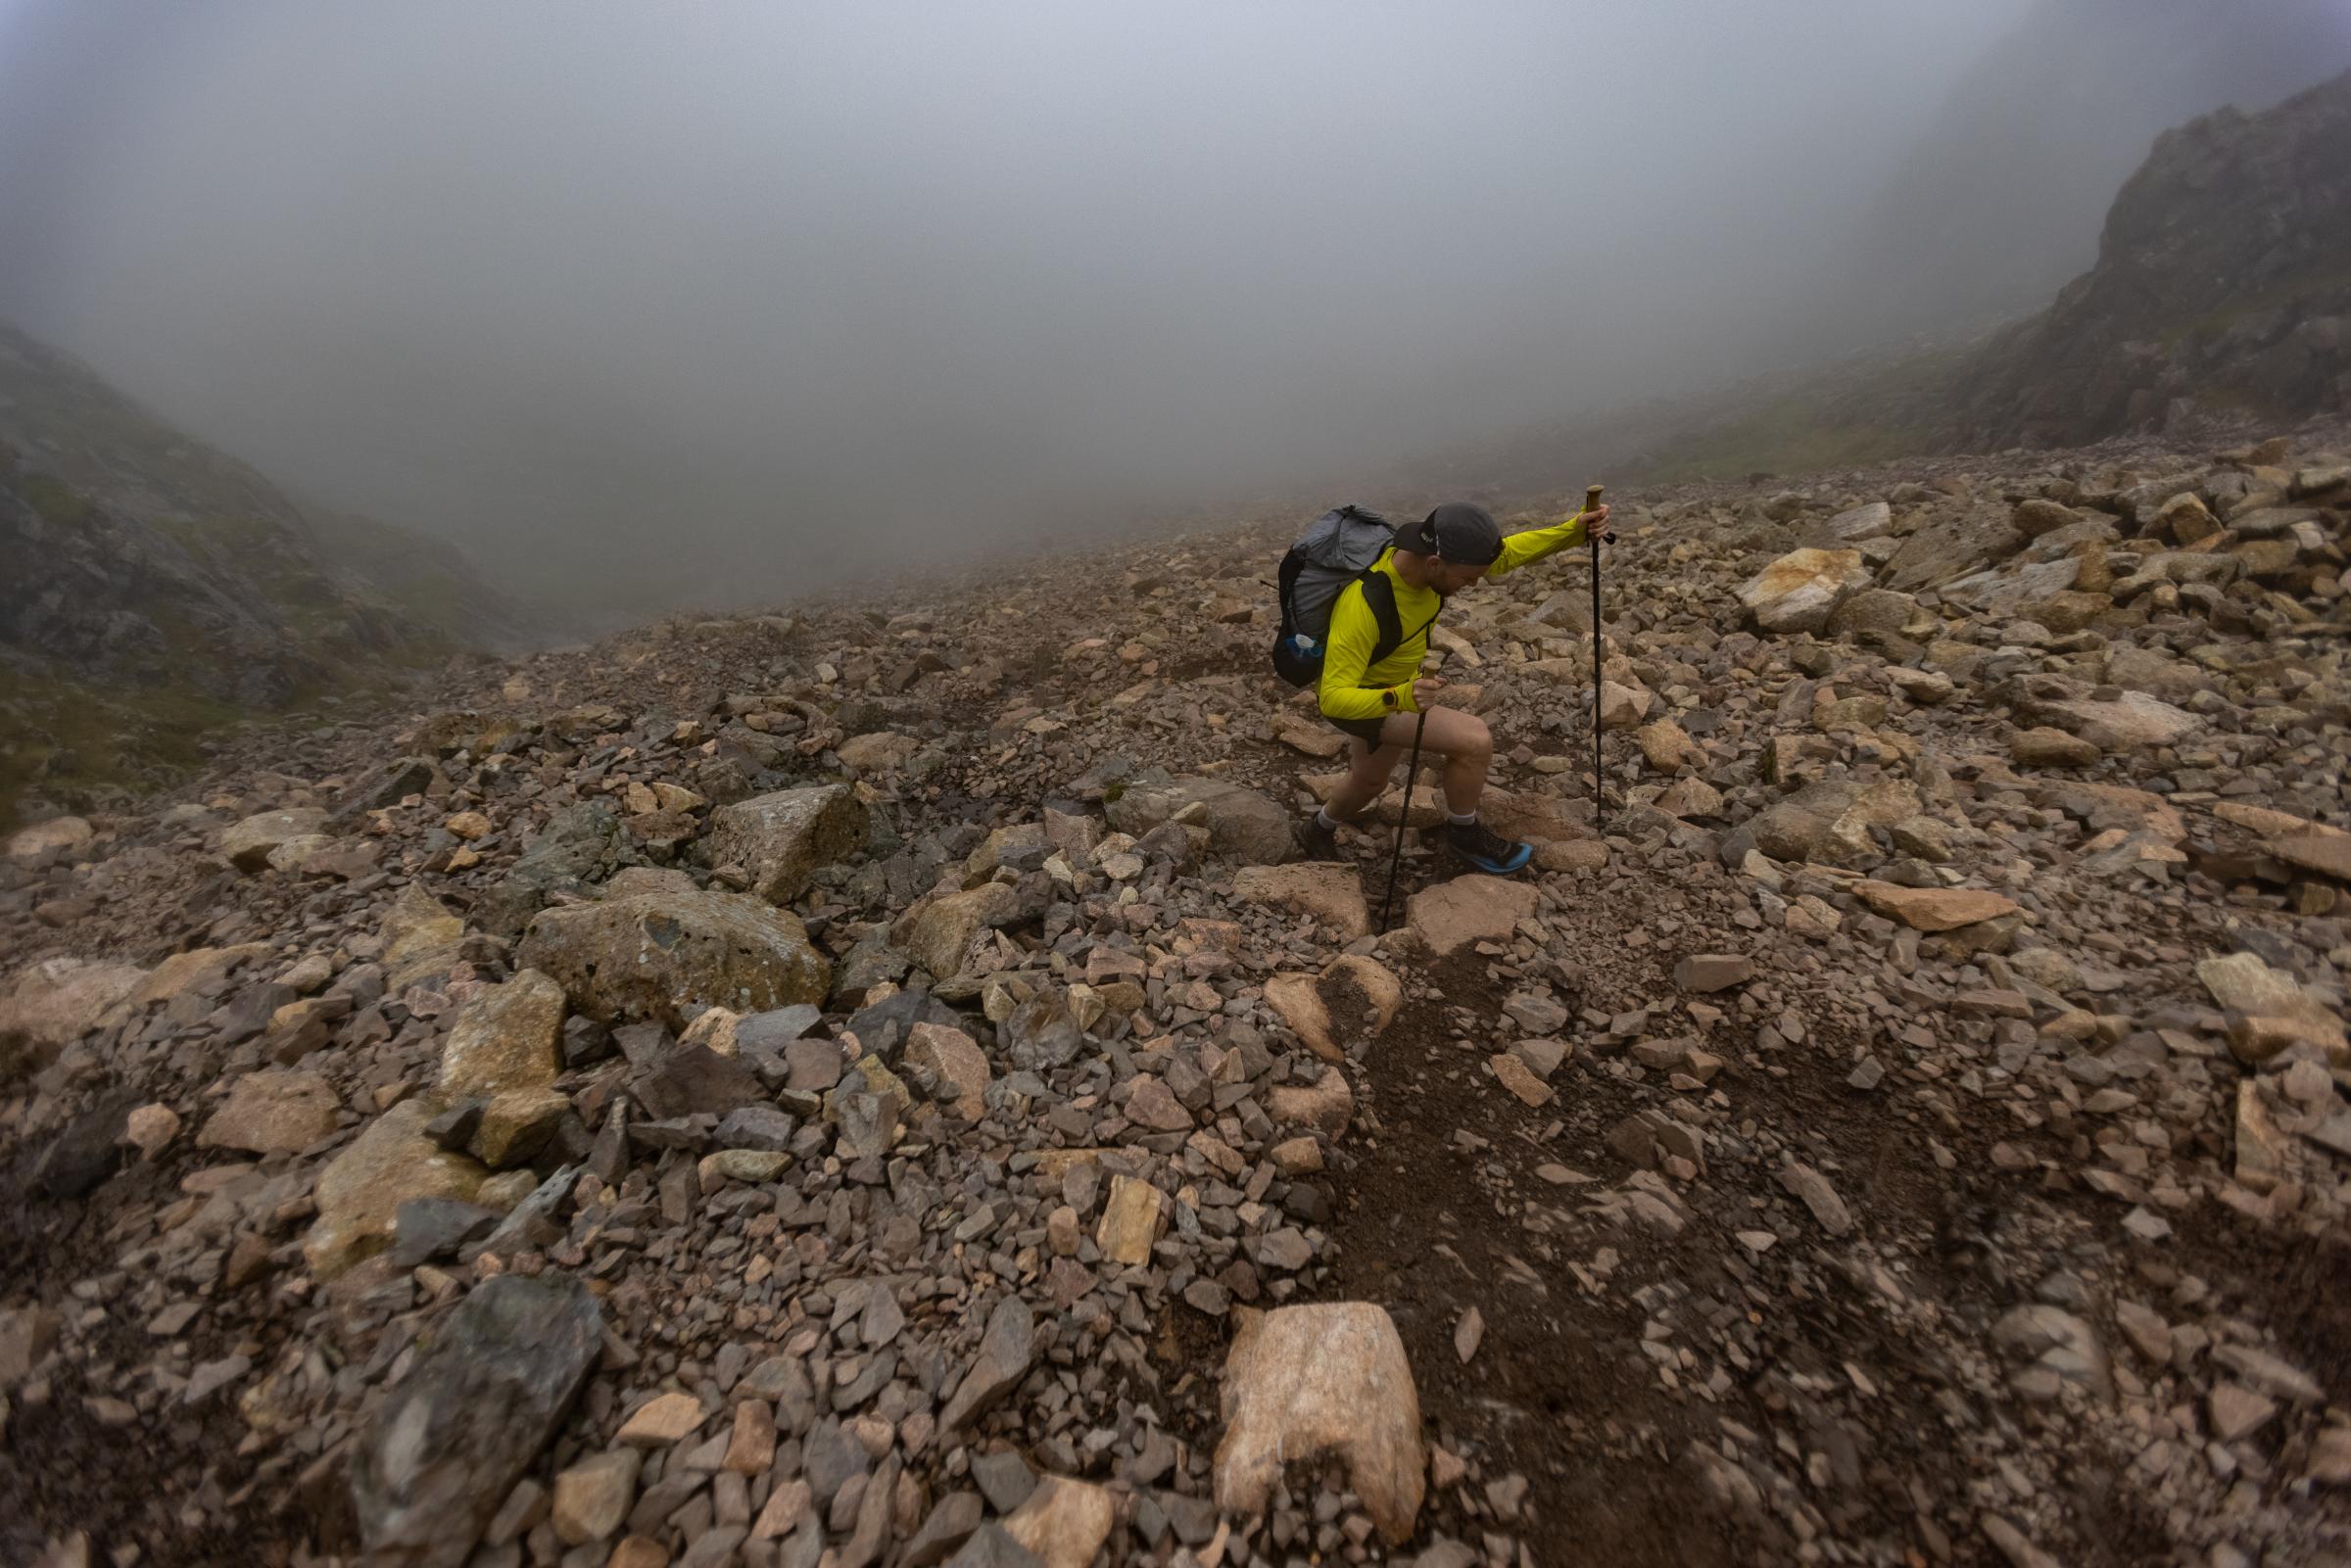 James climbing Scafell Pike, his second peak. Picture inov-8.com / Dave MacFarlane